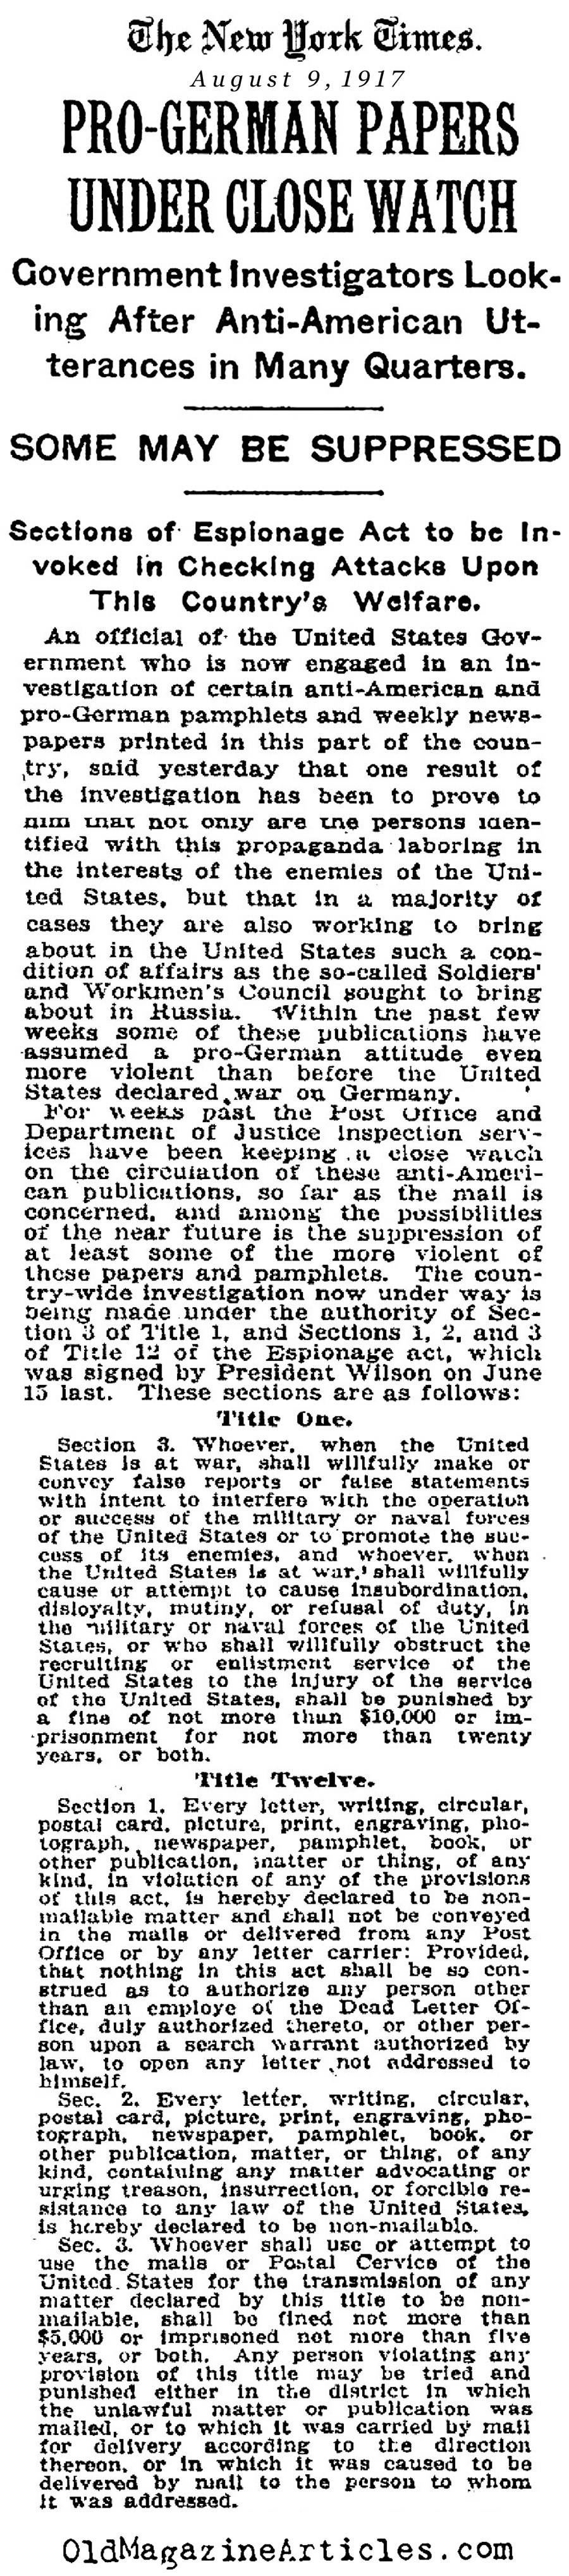 Controlling the Radical Presses (NY Times, 1917)